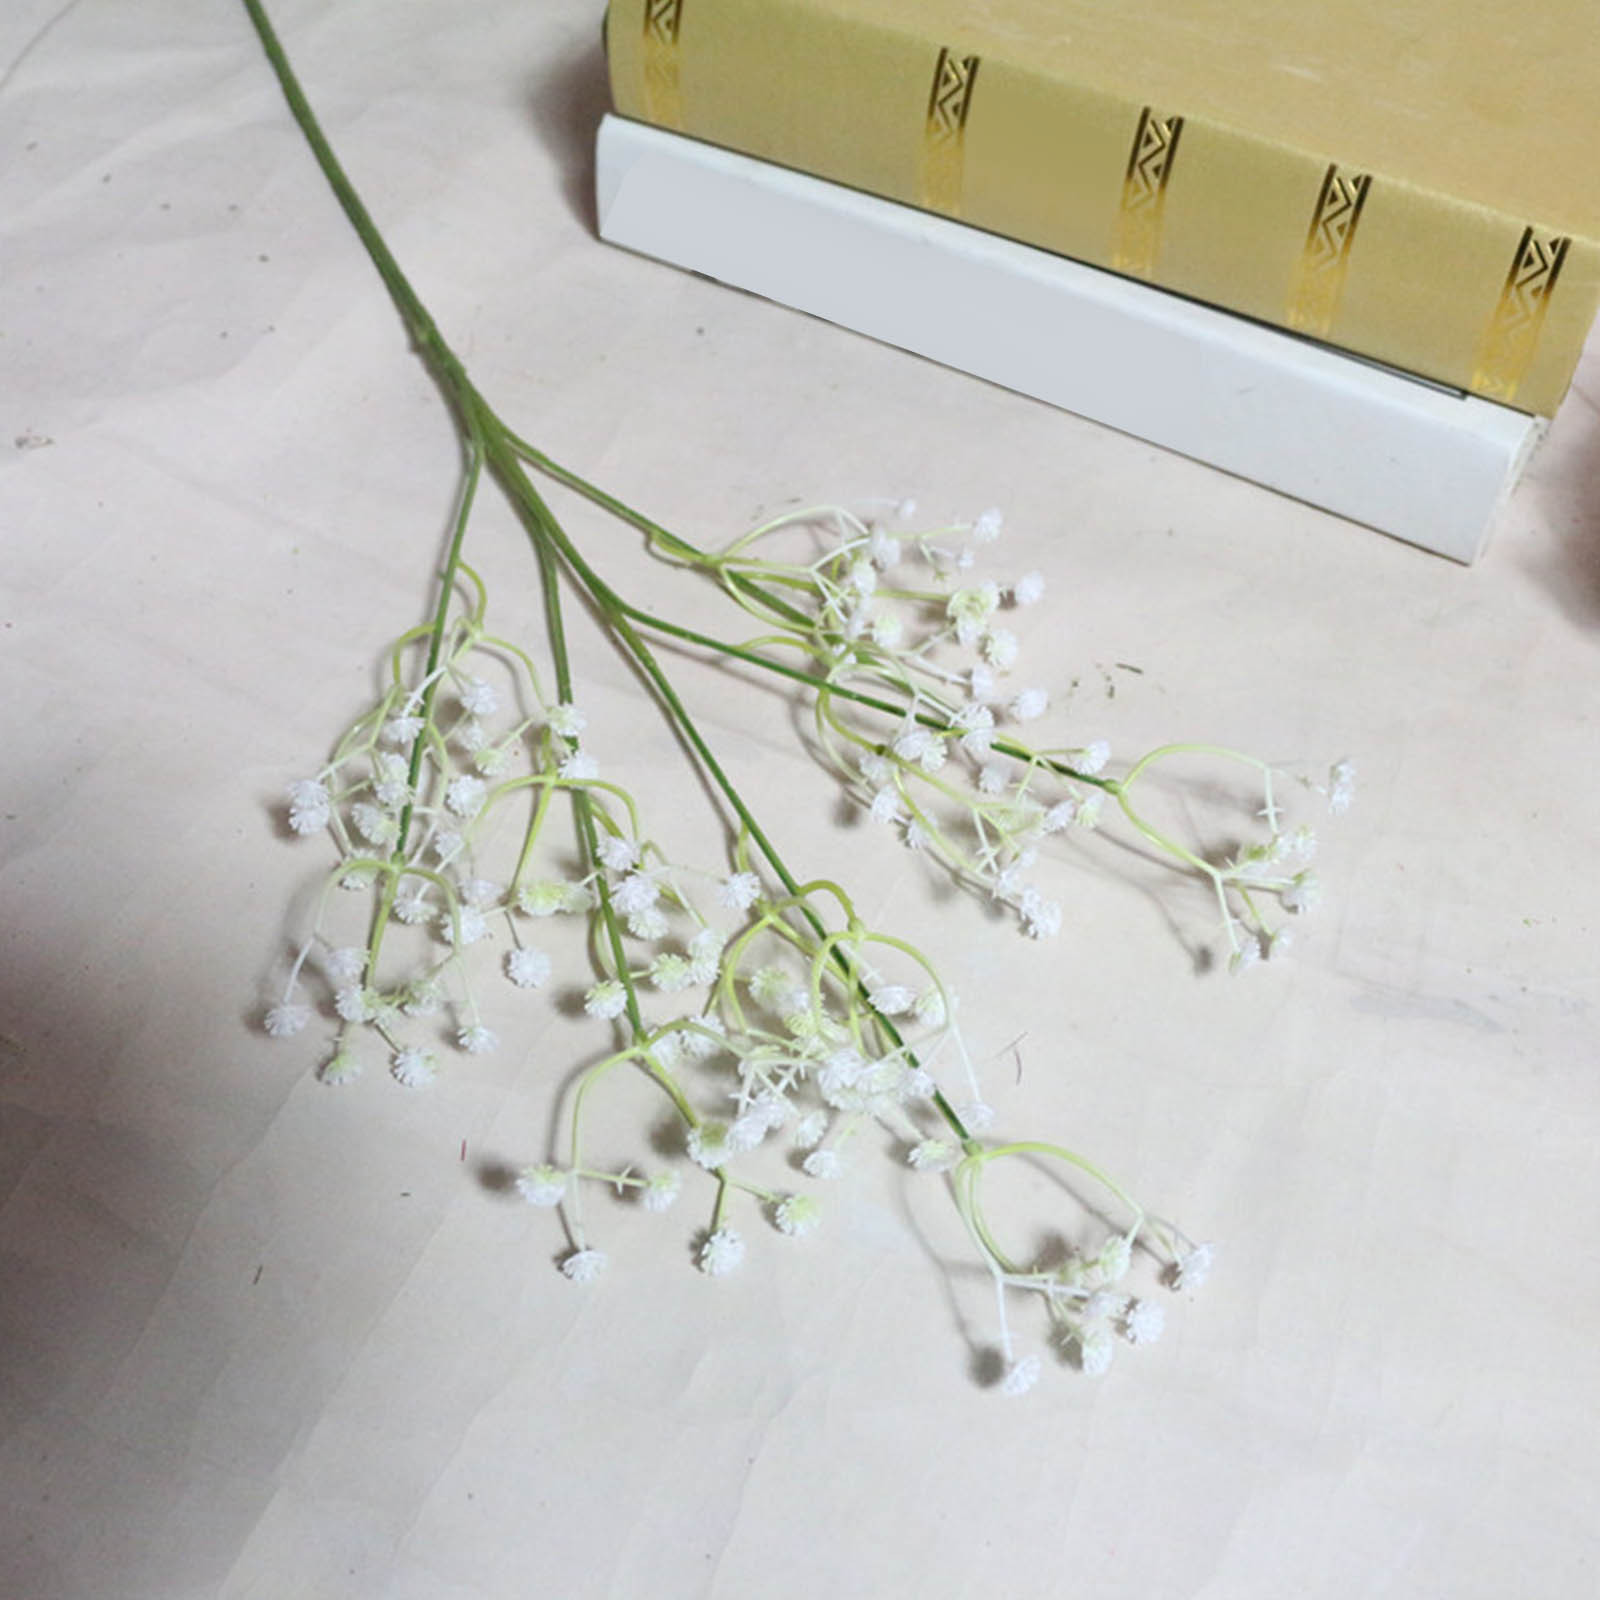 SDJMa Artificial Baby Breath Gypsophila Flowers Bouquets Real Touch Flowers for Wedding Party DIY Wreath Floral Arrangement Home Decoration (White) - image 1 of 9